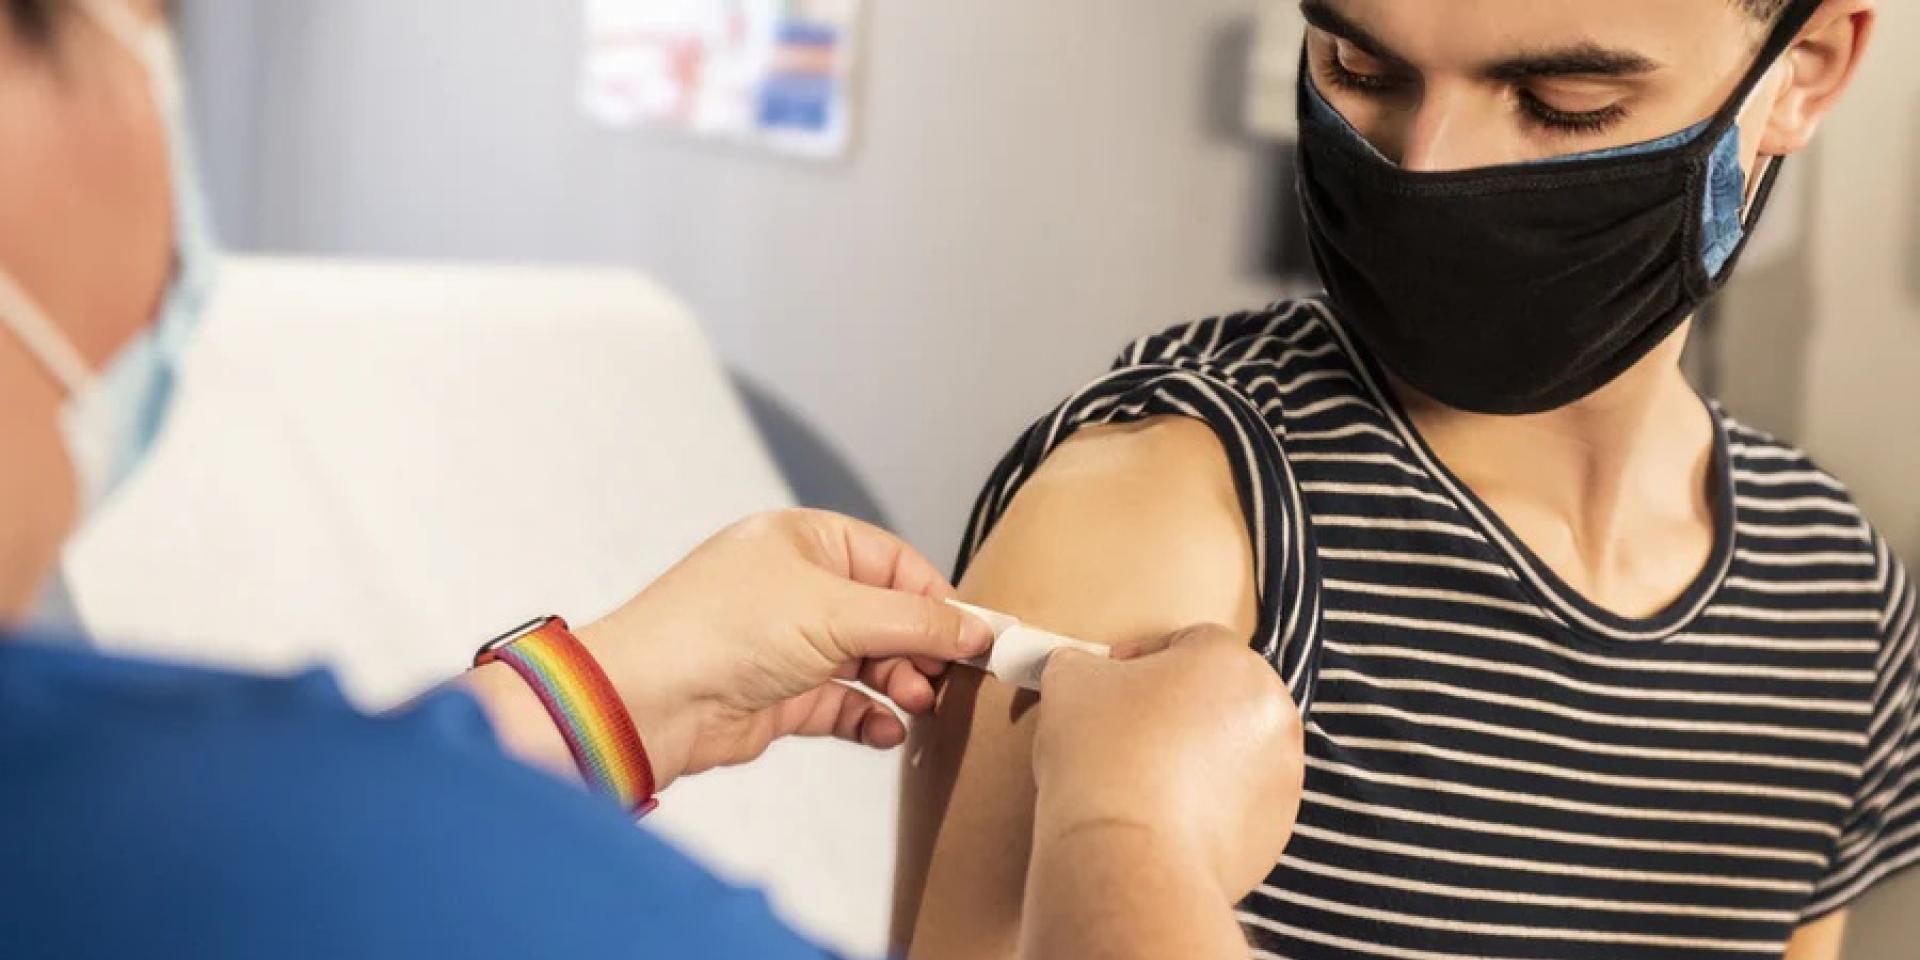 A healthcare worker applies a bandage to a patient after their flu vaccine.